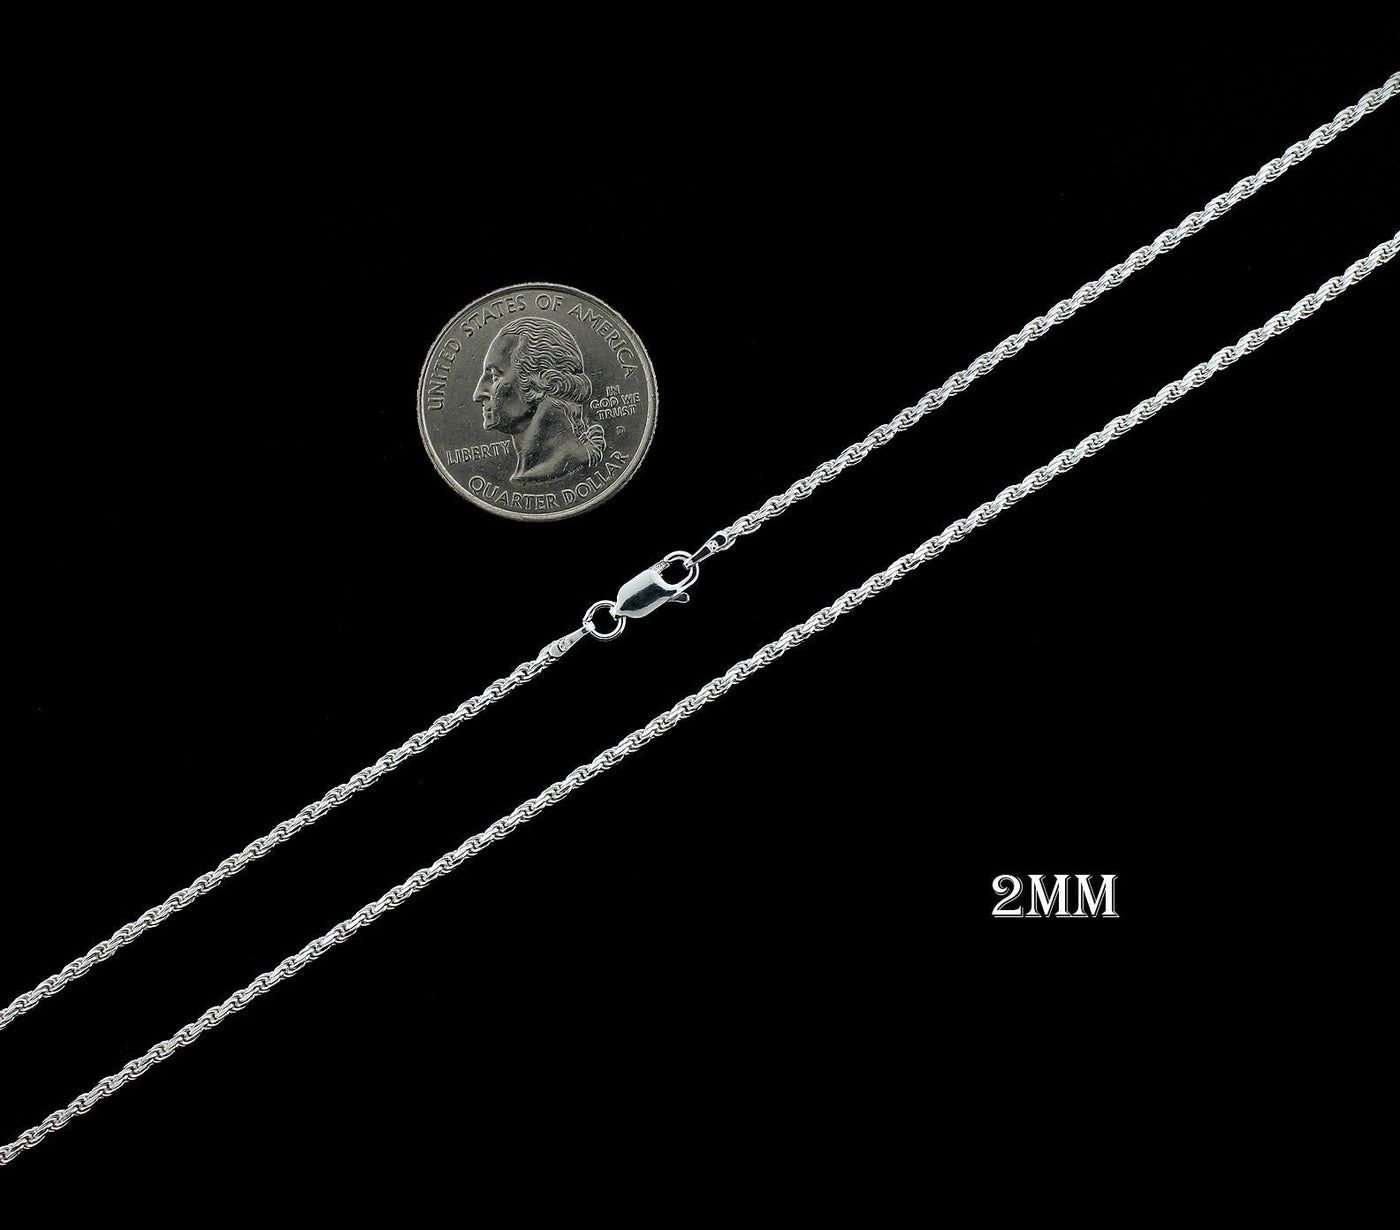 2MM Solid 925 Sterling Silver Diamond-Cut Rope Chain Necklace or Bracelet ITALY